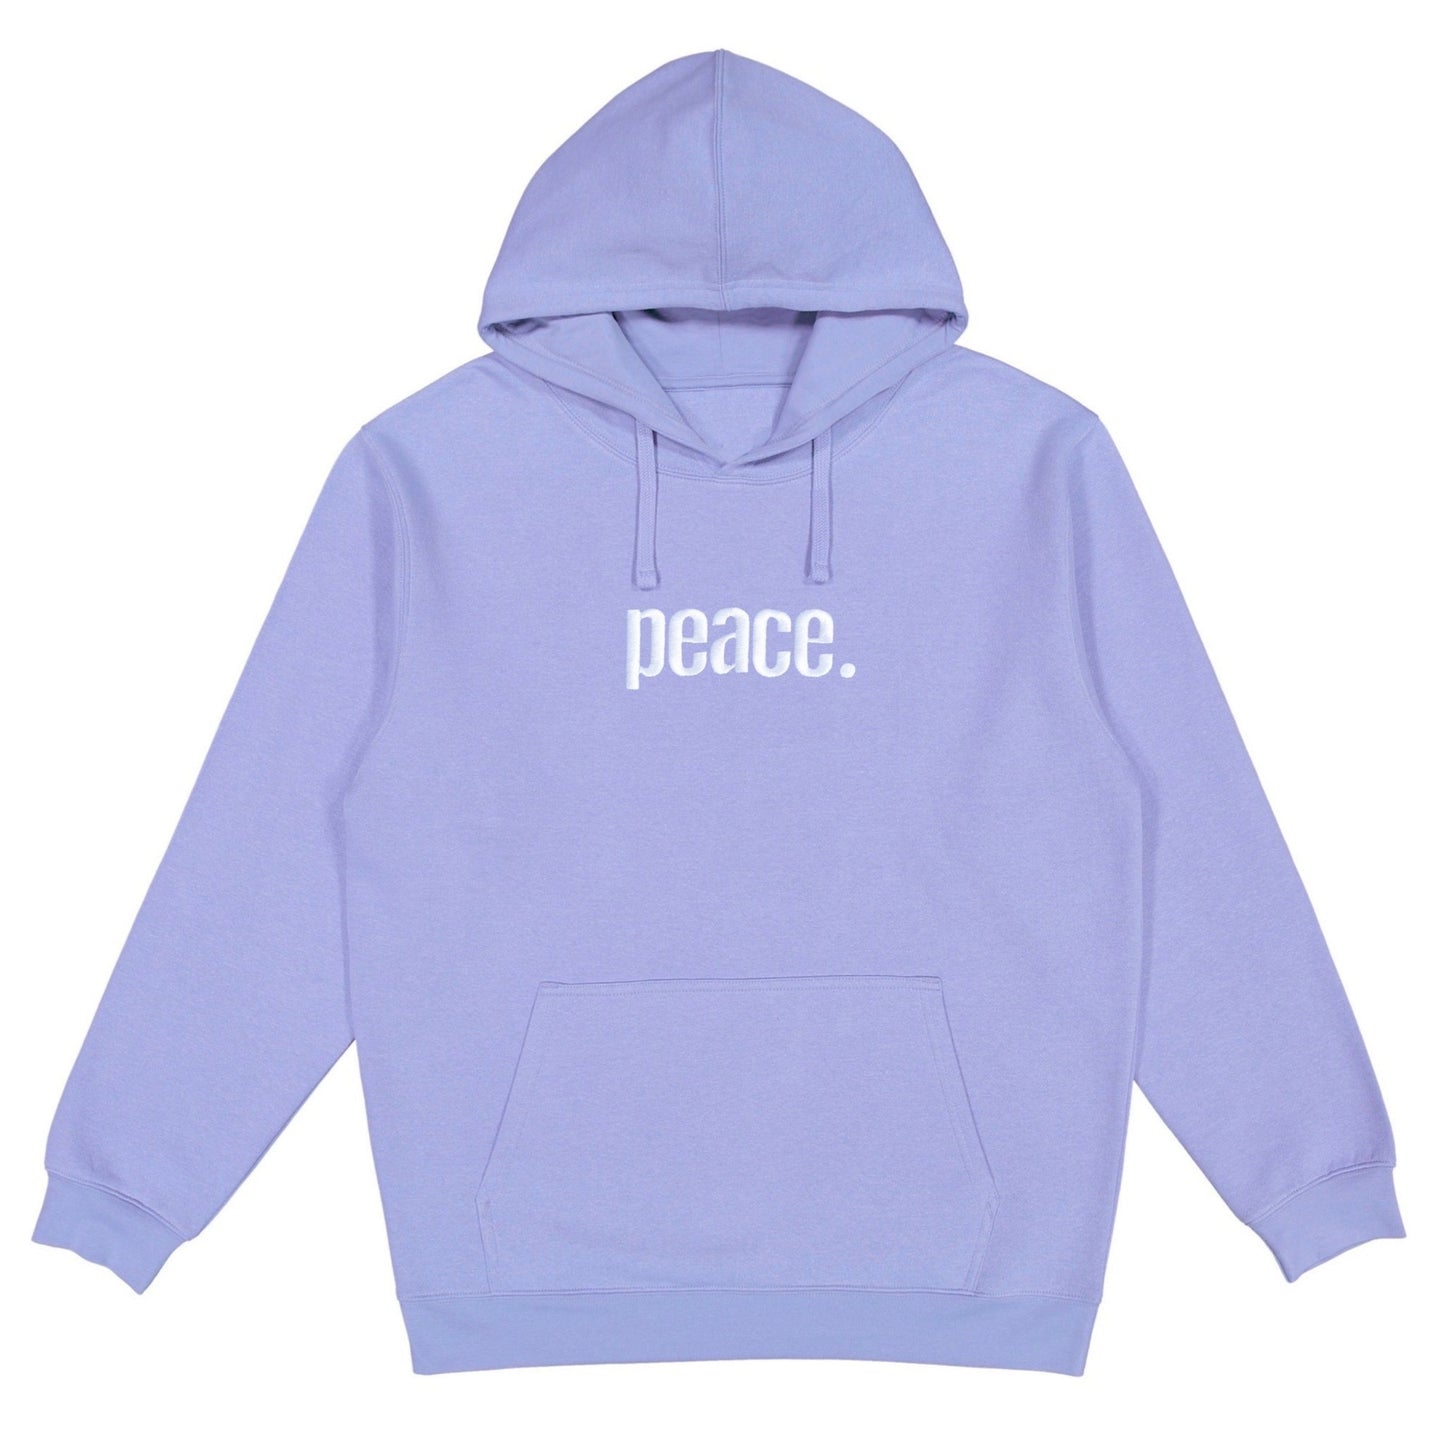 Peace Statement Embroidered Hoodie Wear The Peace Hoodies Violet S